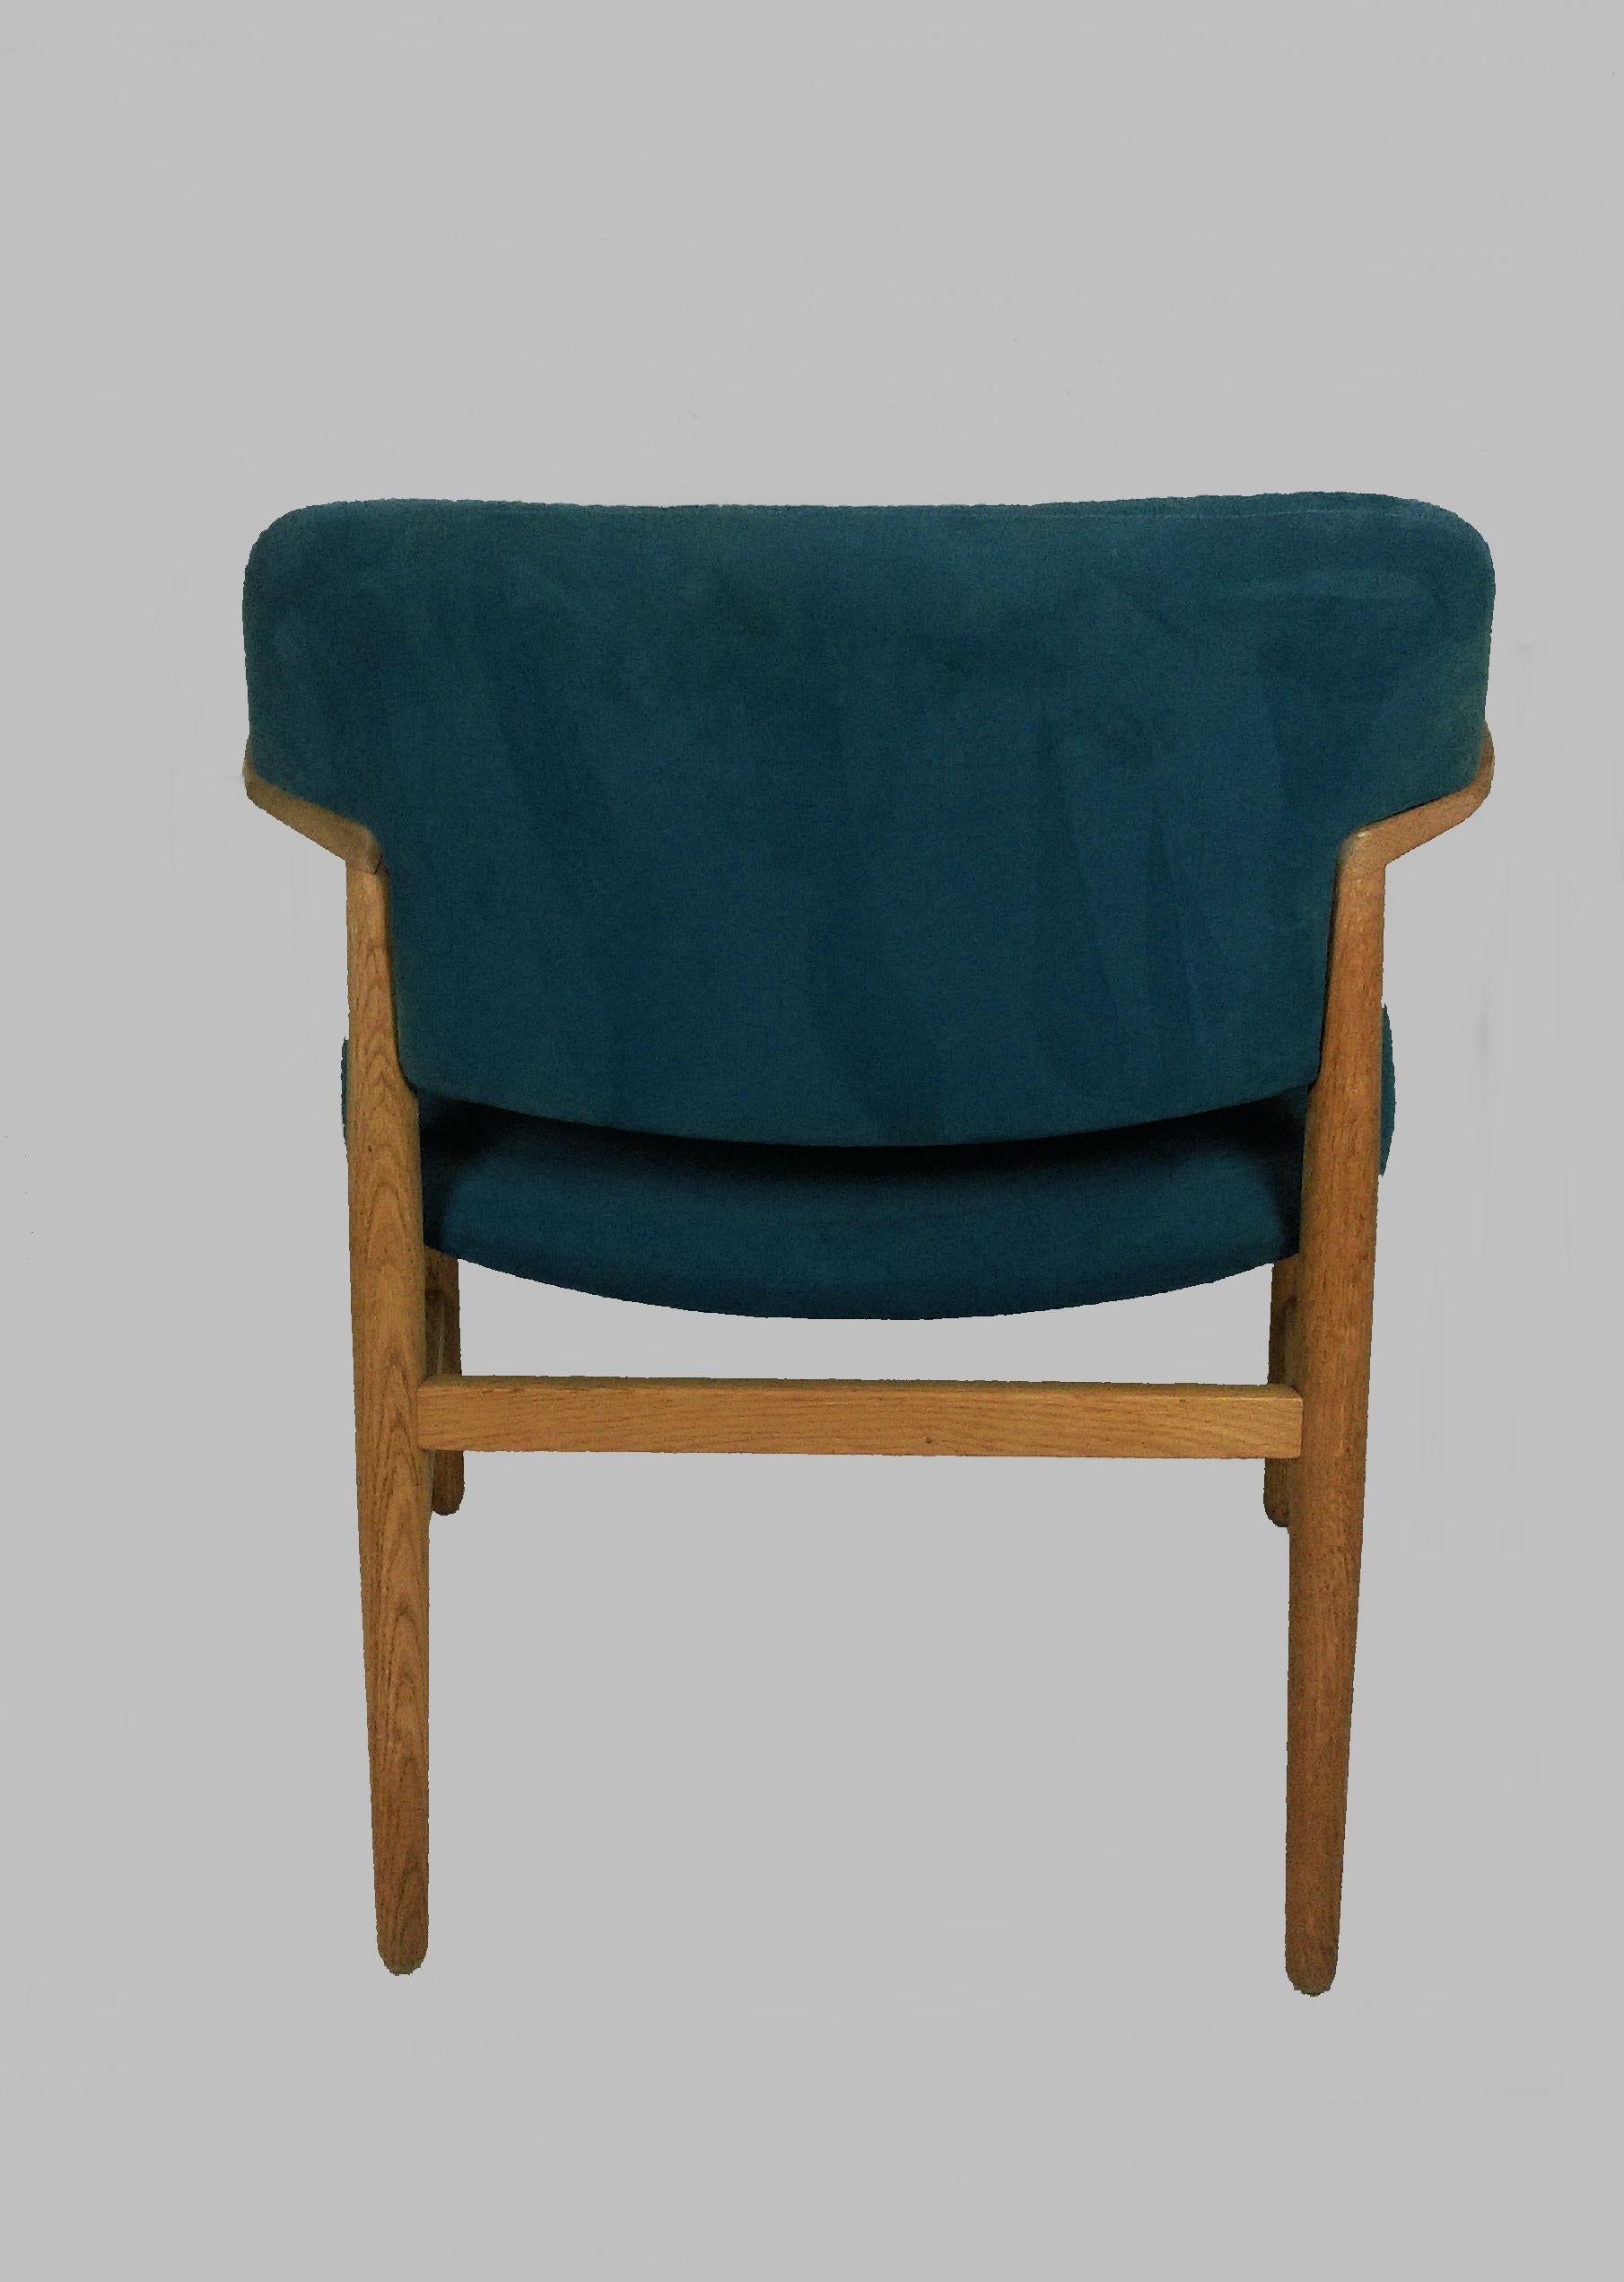 Mid-20th Century Eight Ejner Larsen and Axel Bender Madsen Oak Armchairs, Inc. Reupholstery For Sale